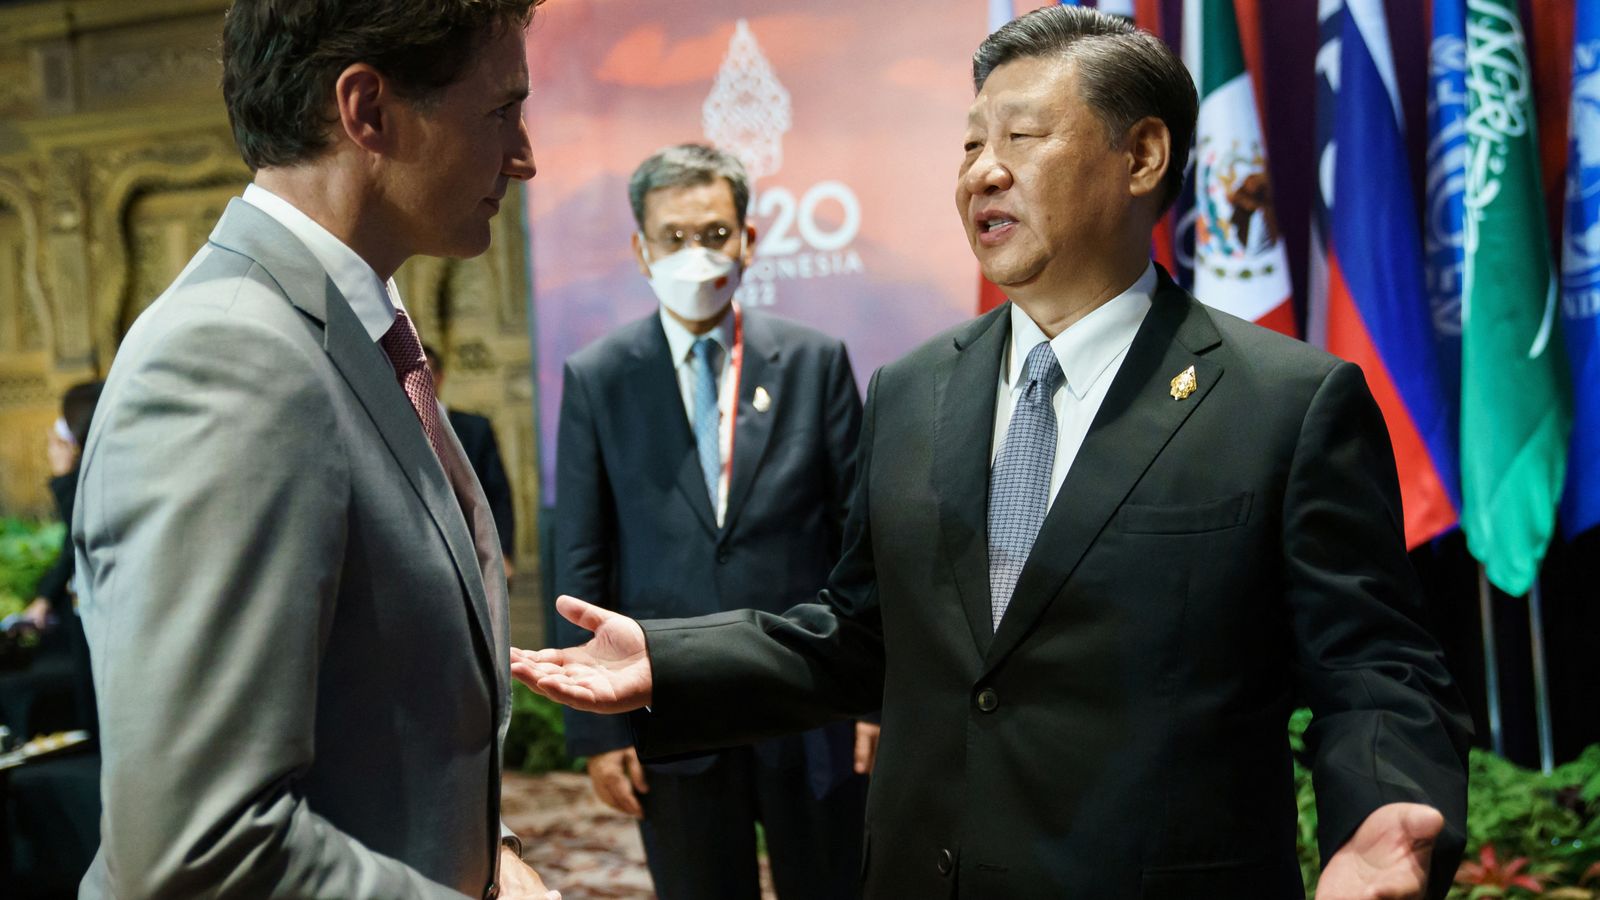 Chinese President Xi Jinping scolds Canada's Justin Trudeau for leaking meeting details to the press